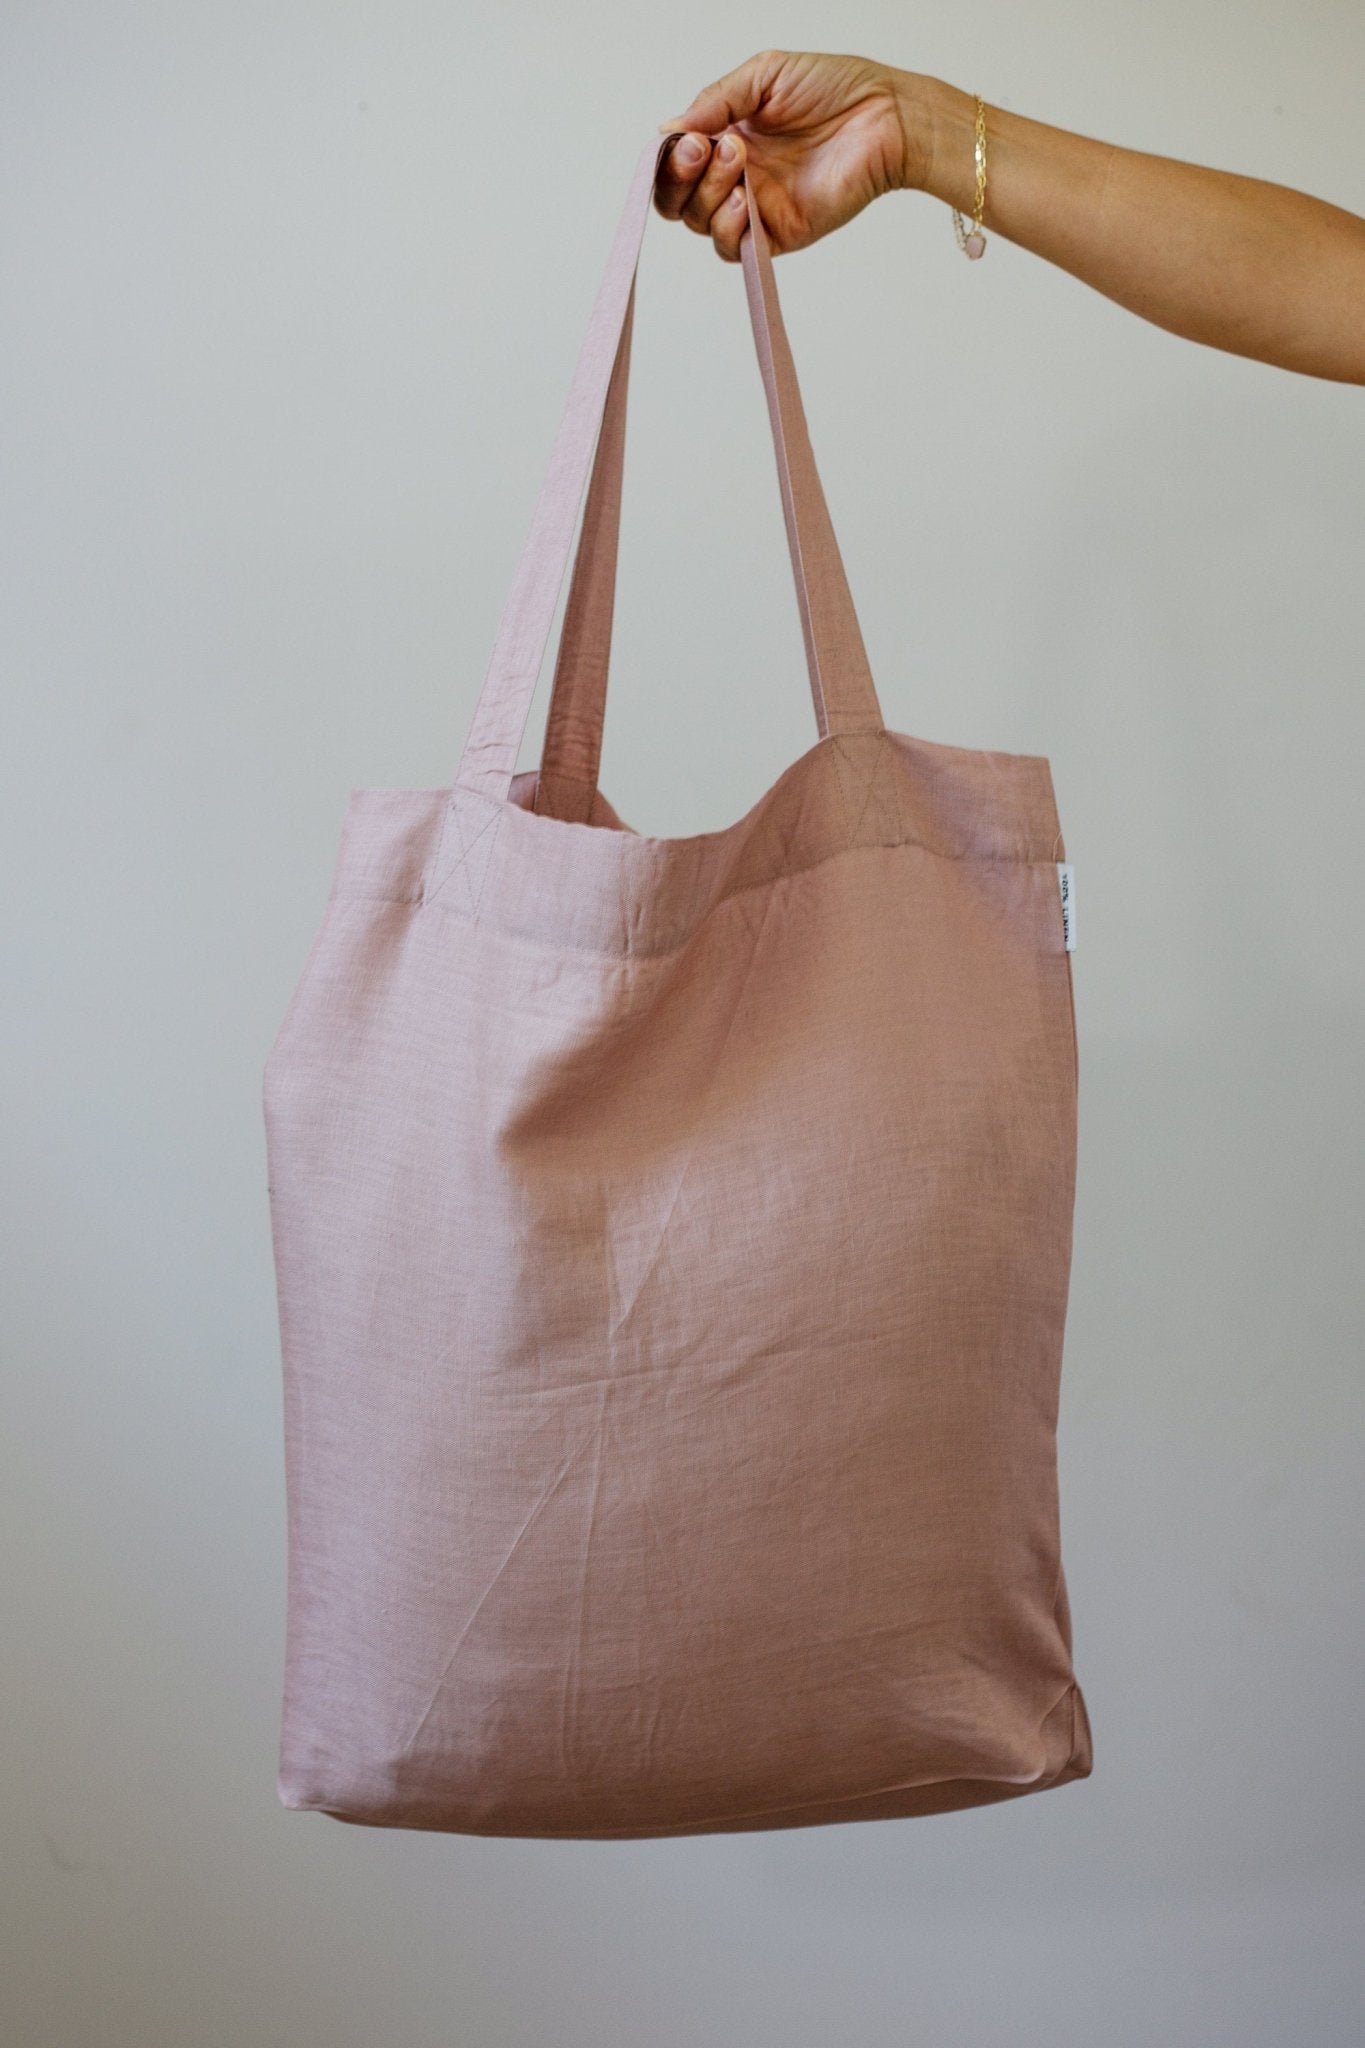 Load image into Gallery viewer, Personalized Birth Month Flower Linen Shopping Tote Bag | Personalized Bridesmaid Proposal Gift Idea | Eco Friendly Reusable Market Tote Bag
